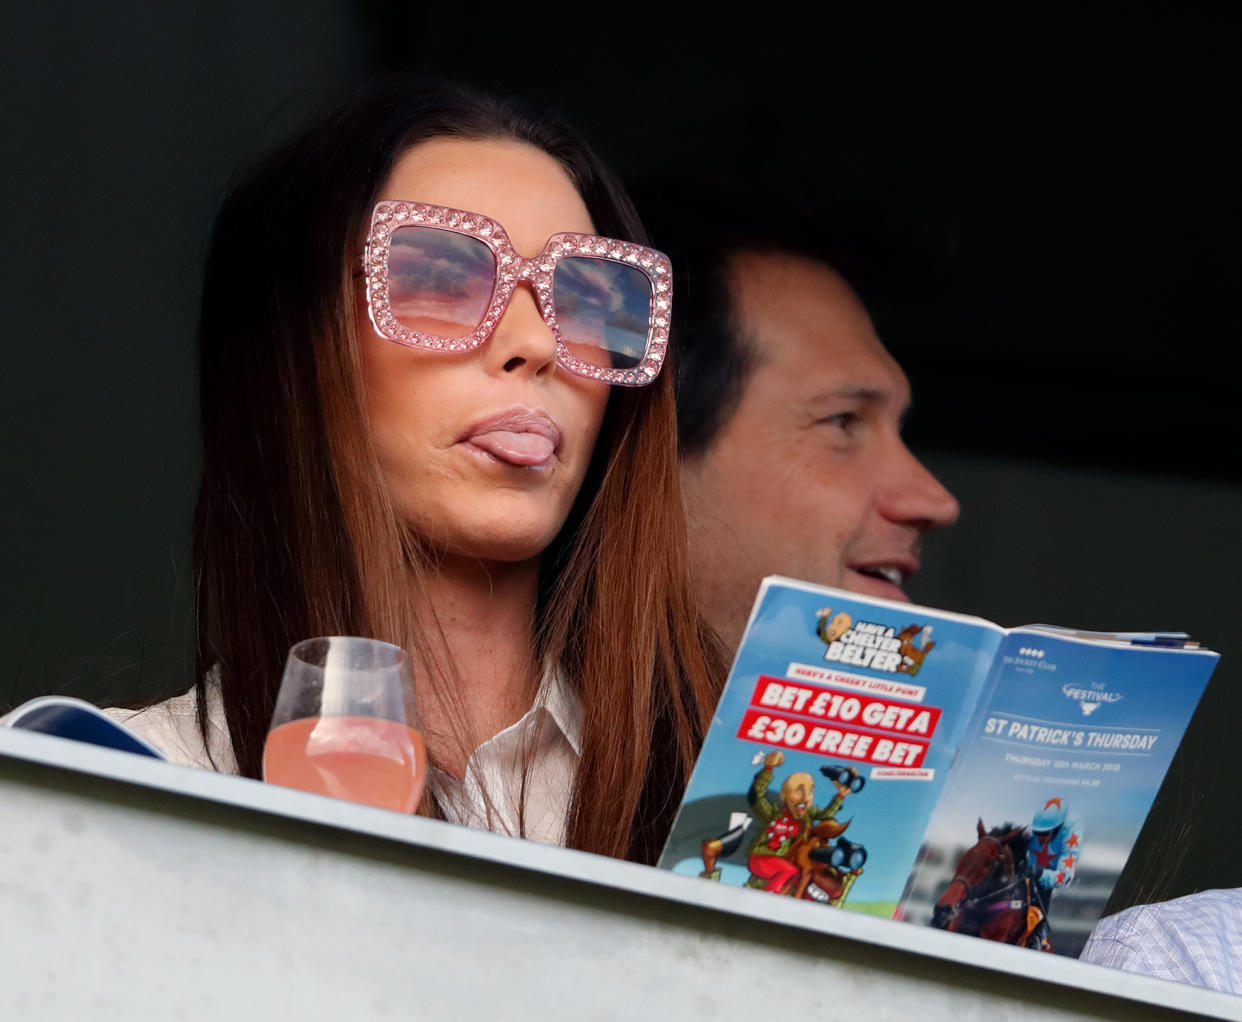 CHELTENHAM, UNITED KINGDOM - MARCH 15: (EMBARGOED FOR PUBLICATION IN UK NEWSPAPERS UNTIL 24 HOURS AFTER CREATE DATE AND TIME) Katie Price watches the racing as she attends day 3 'St Patrick's Thursday' of the Cheltenham Festival at Cheltenham Racecourse on March 15, 2018 in Cheltenham, England. (Photo by Max Mumby/Indigo/Getty Images)